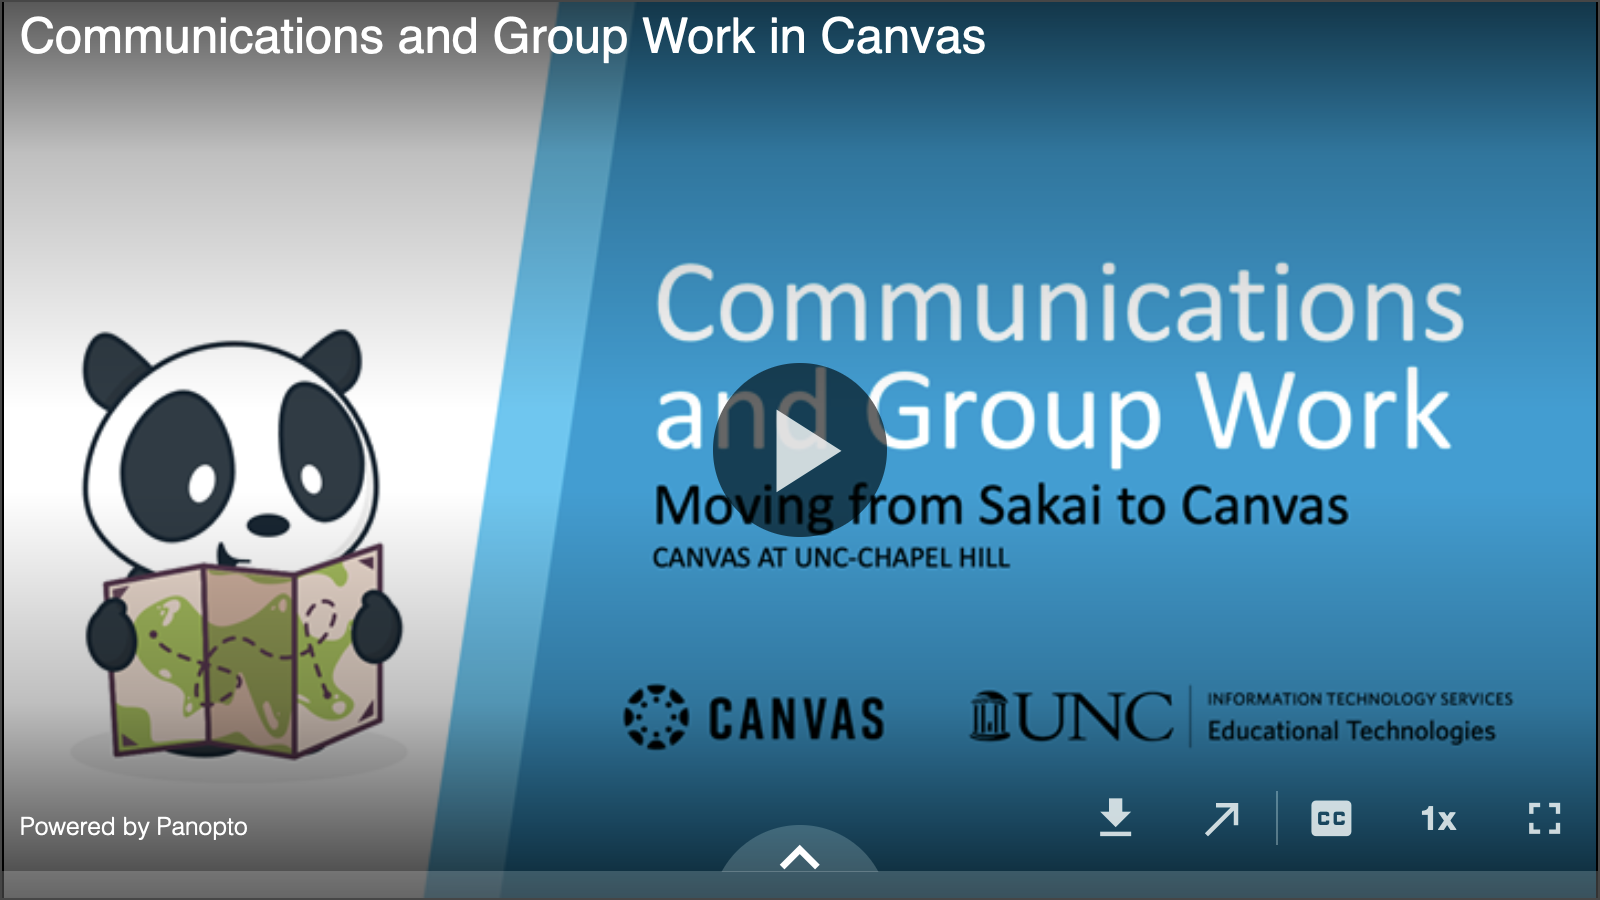 View recording on Canvas communications and group work